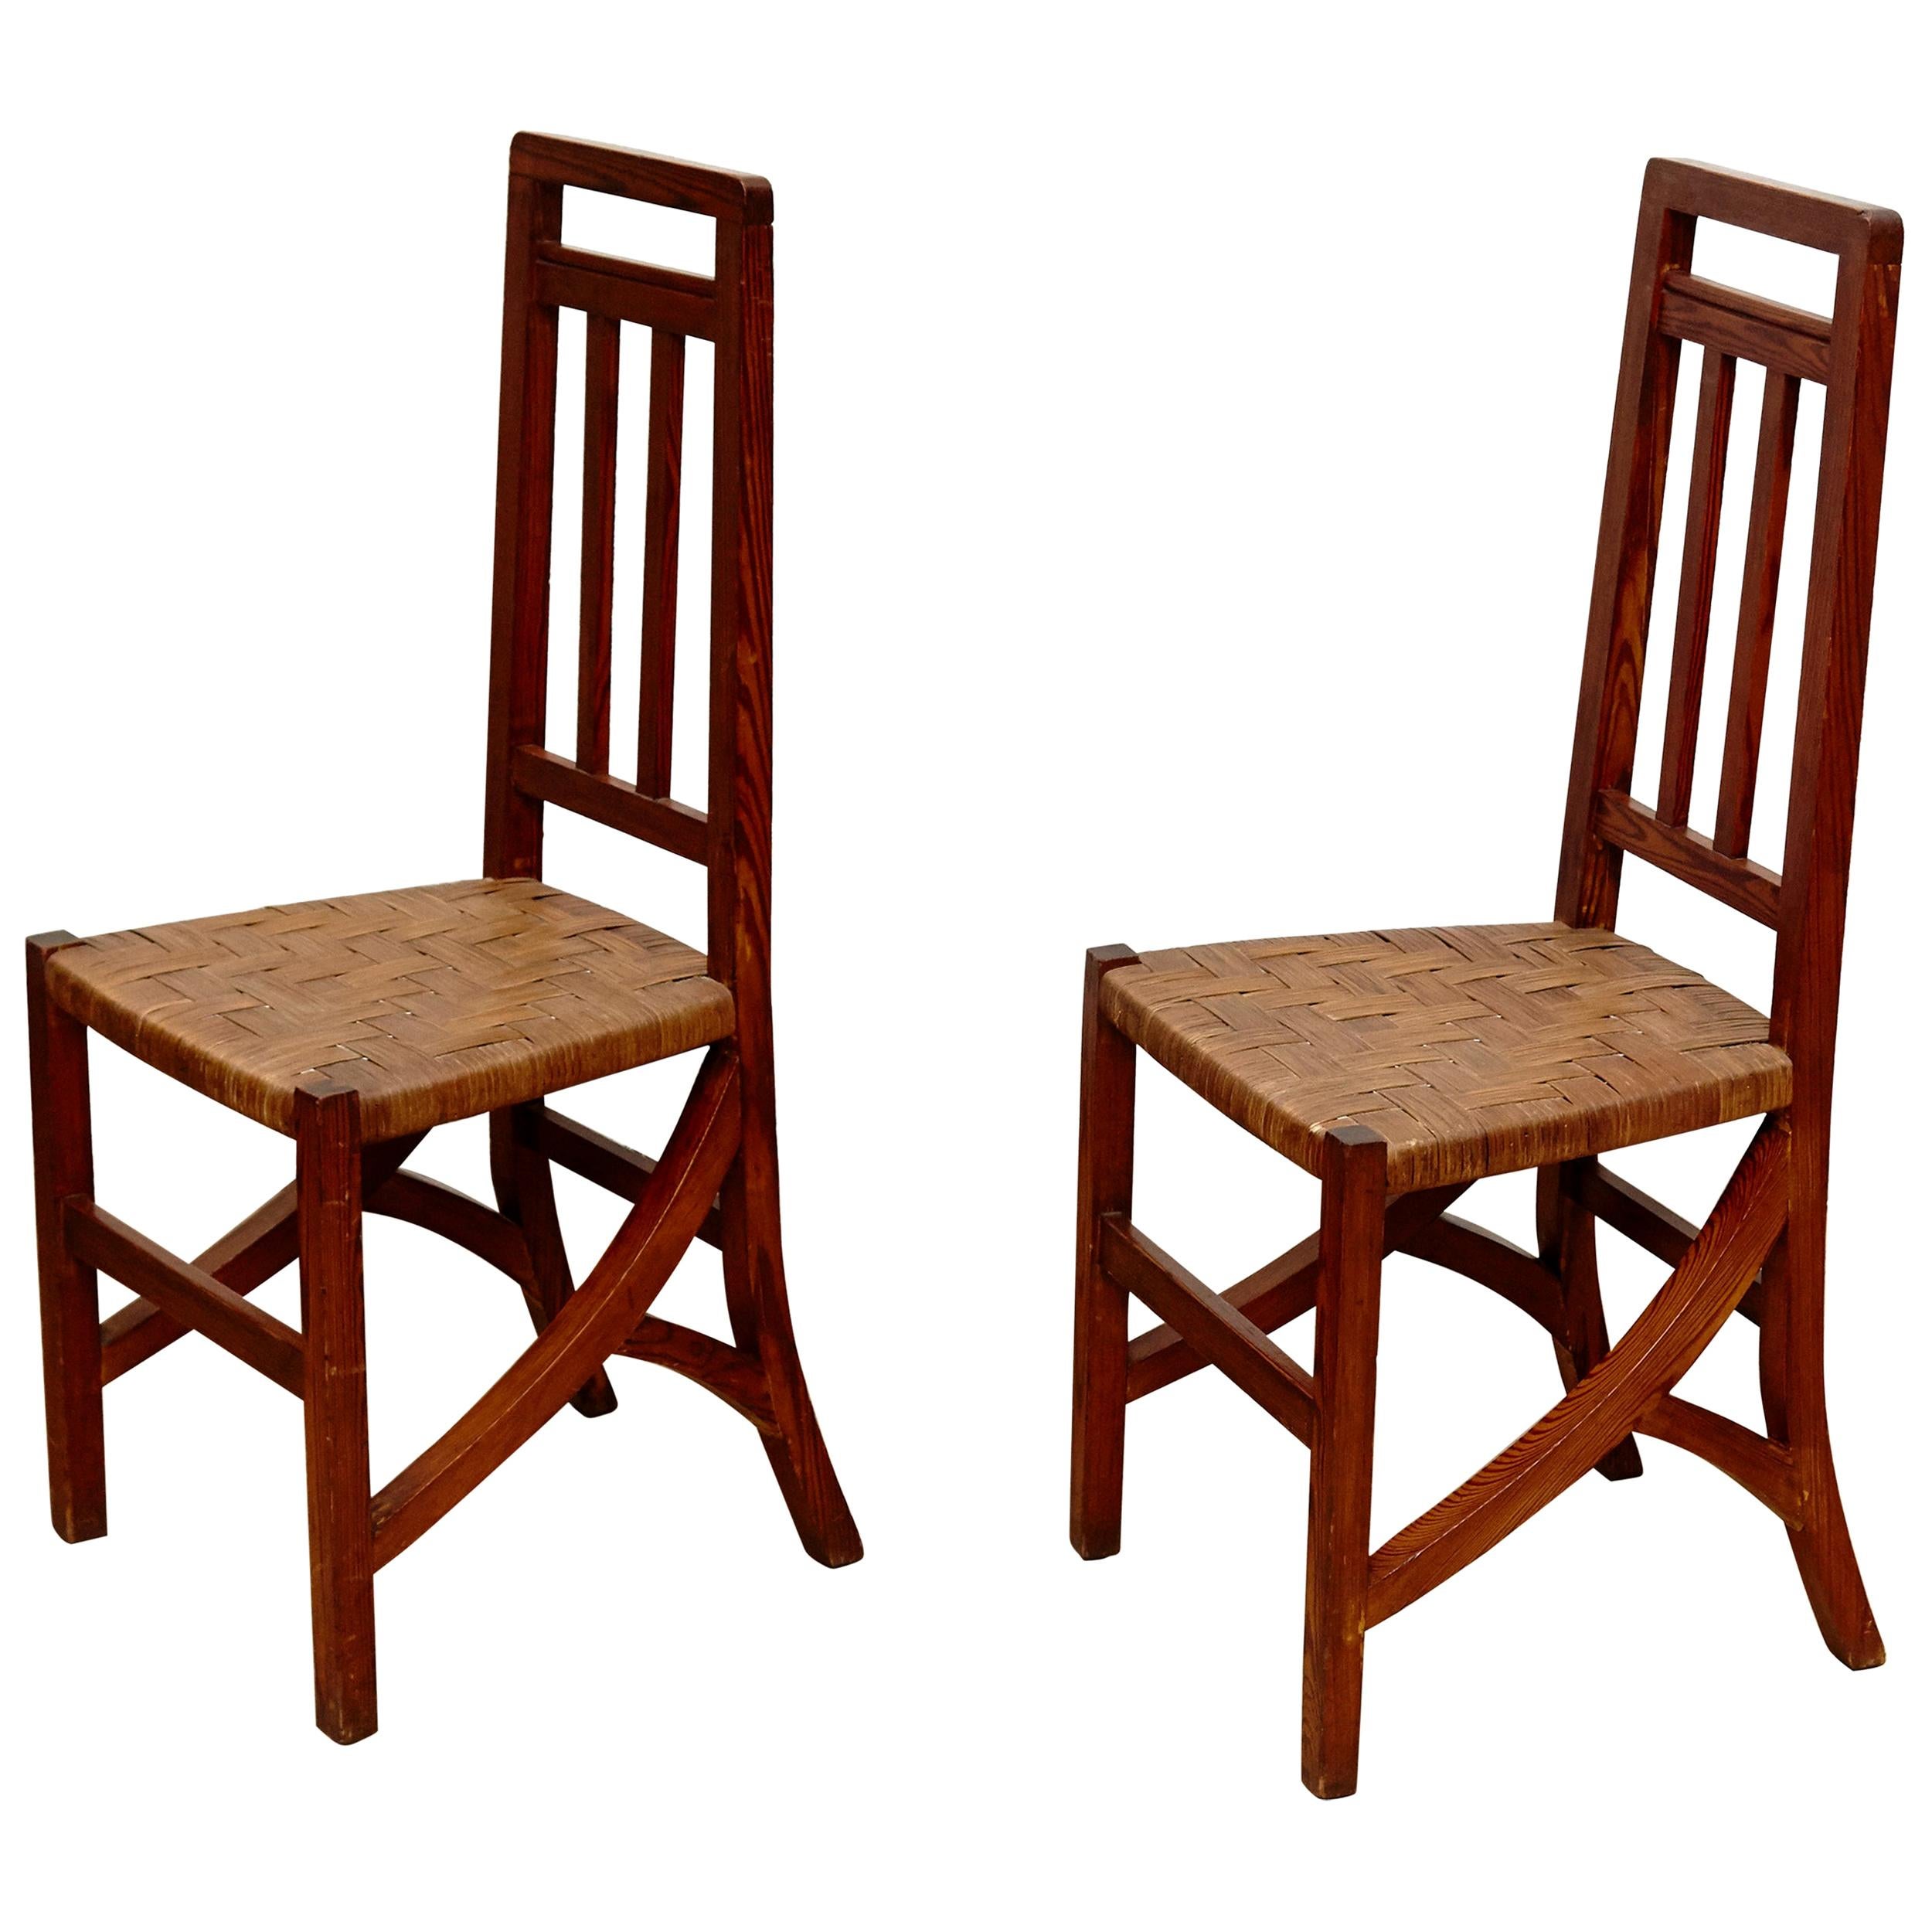 Set of Two Arts & Crafts Chairs in Wood and Rattan, circa 1910